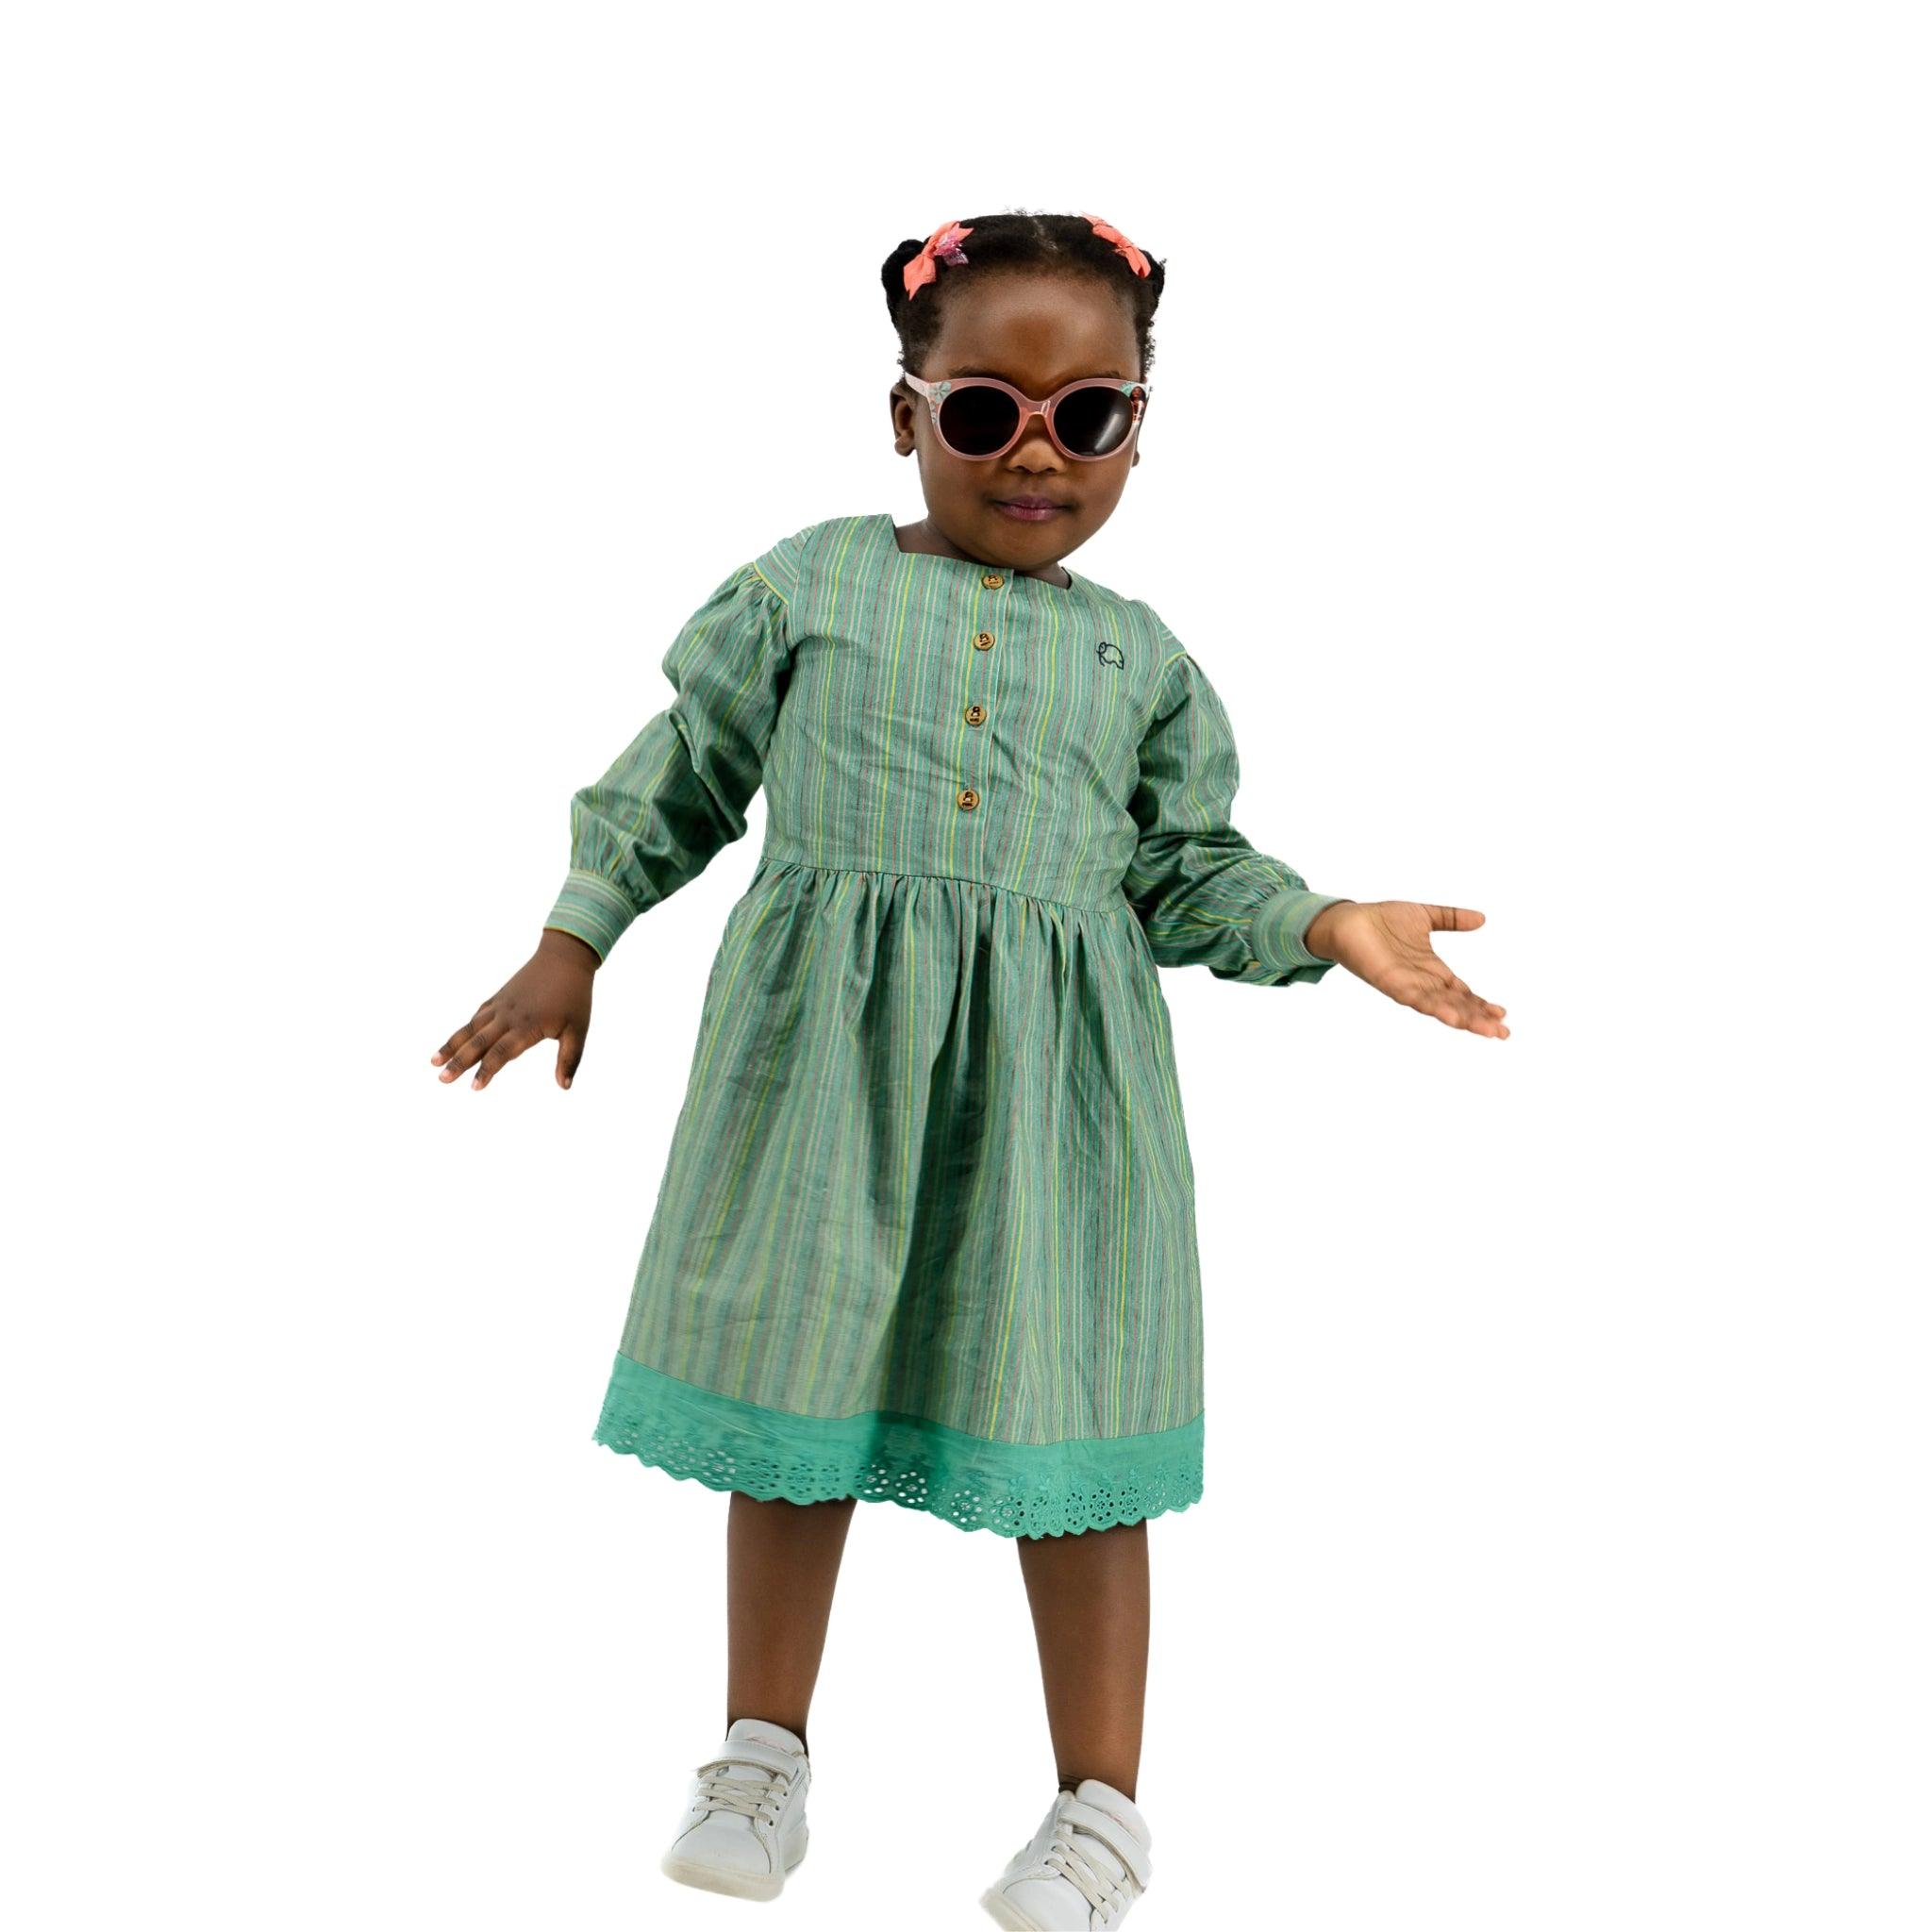 A young girl in a Karee green striped long puff sleeve cotton dress and white sneakers, wearing sunglasses and hair clips, stands smiling against a white background.